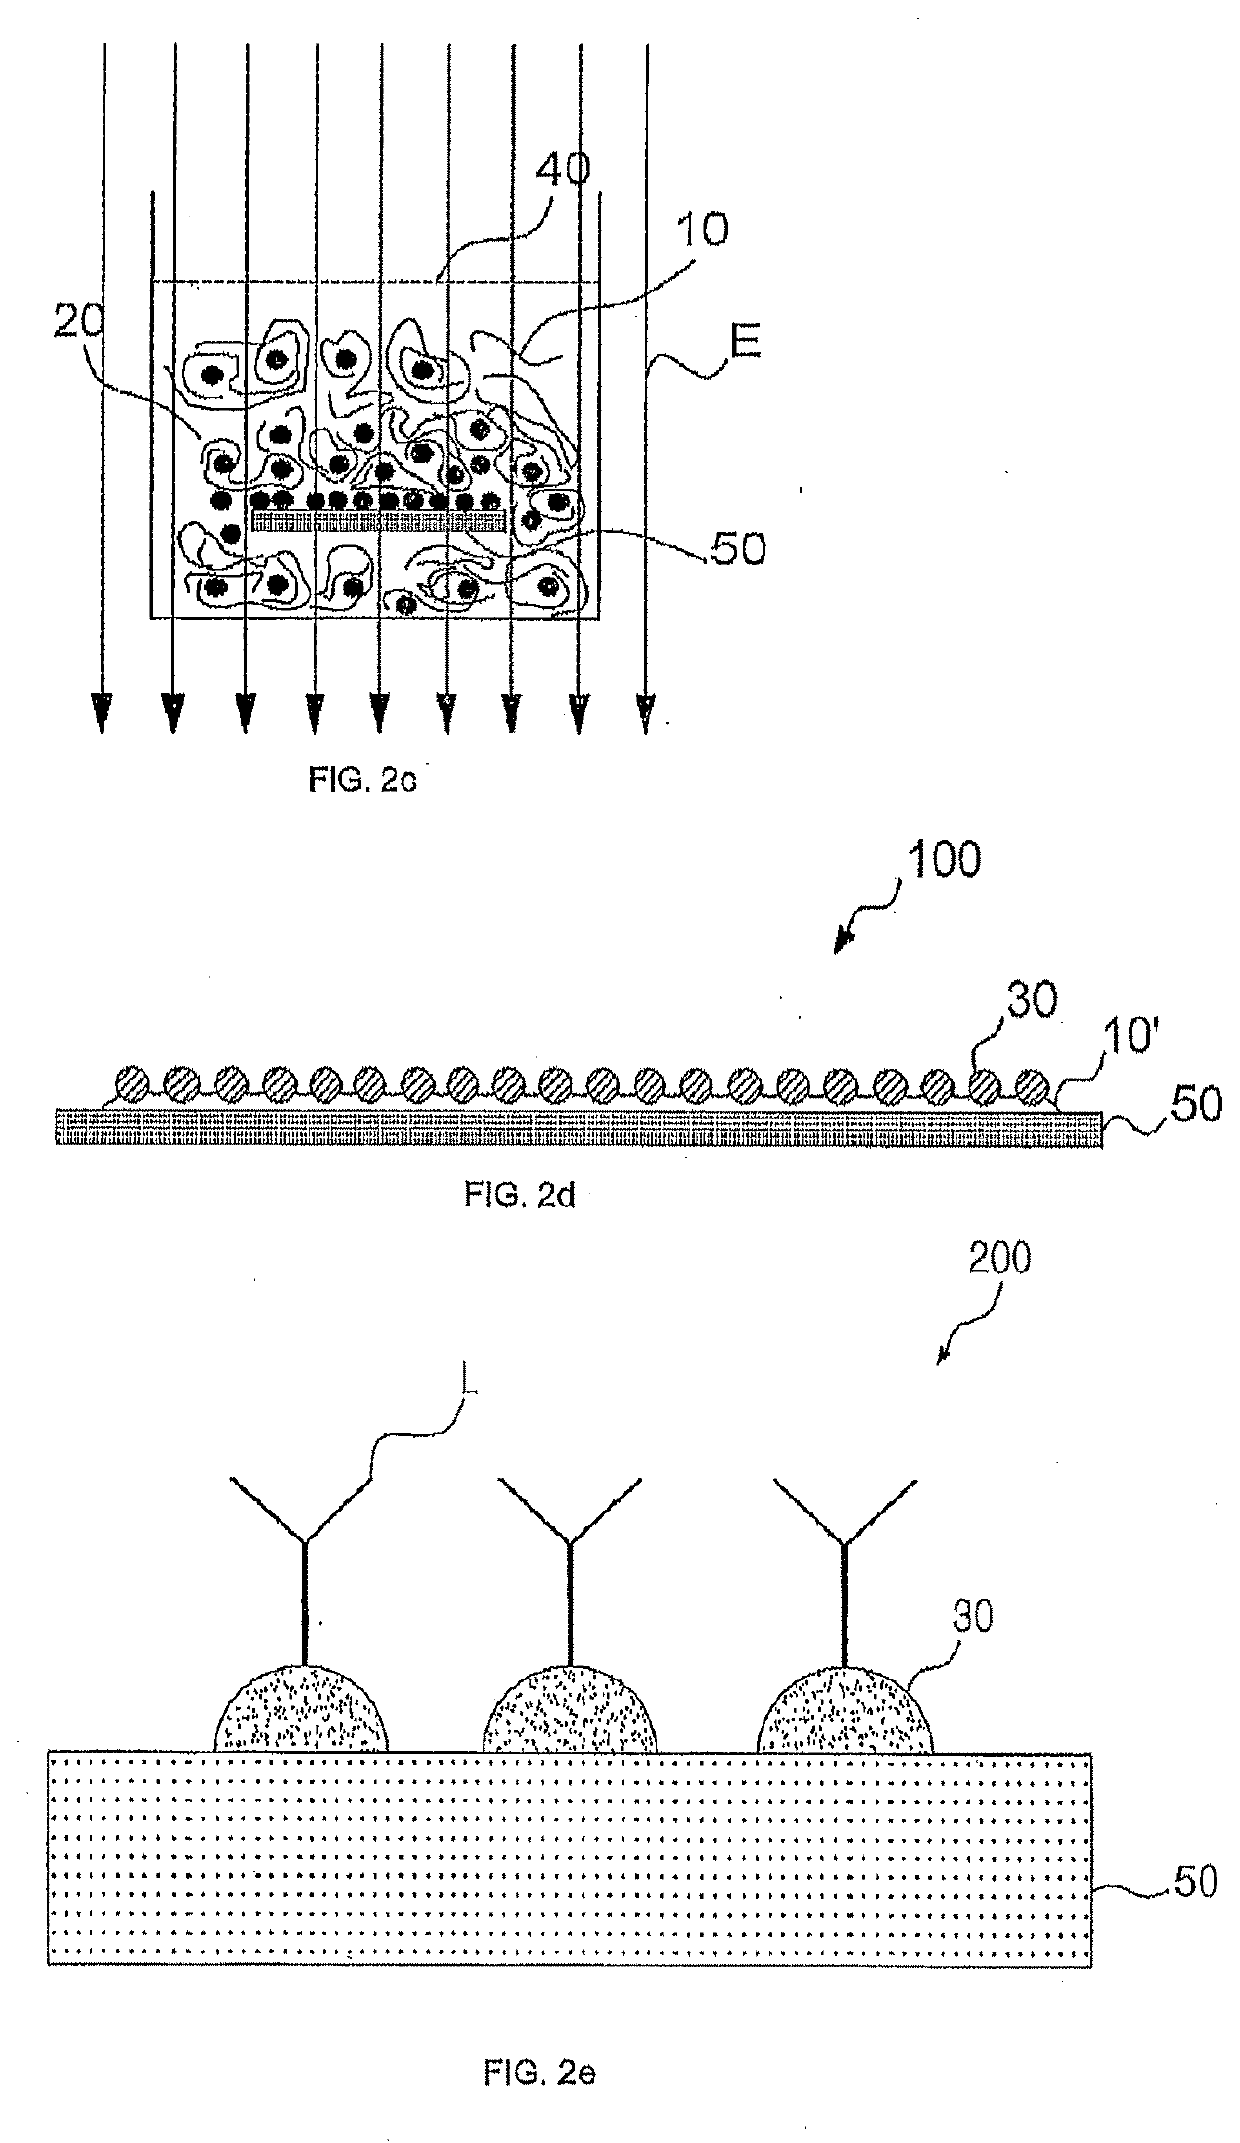 Method for manufacturing nanoparticle array, surface plasmon resonance-based sensor and method for analyzing using same